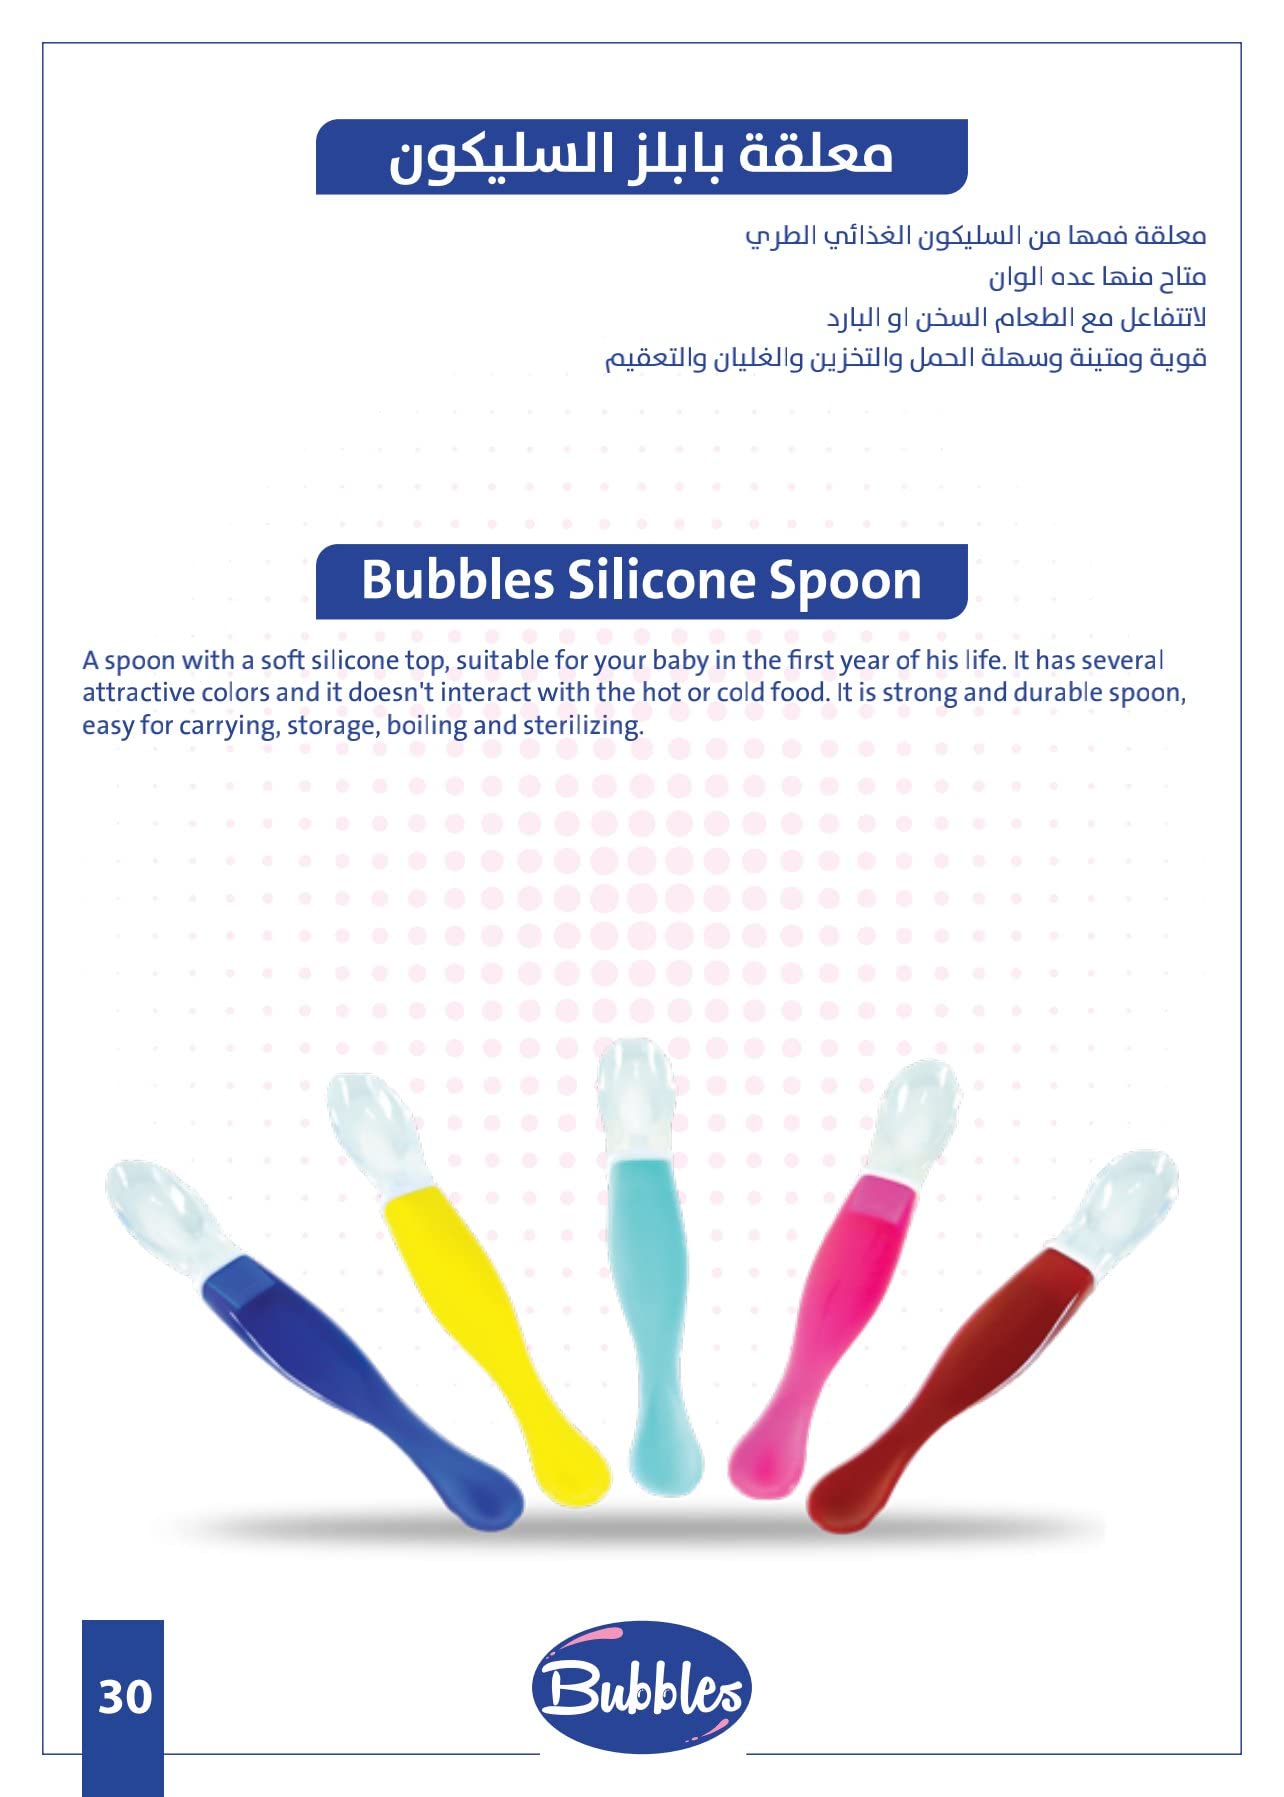 Bubbles Baby Silicone Spoon, Variable Colors